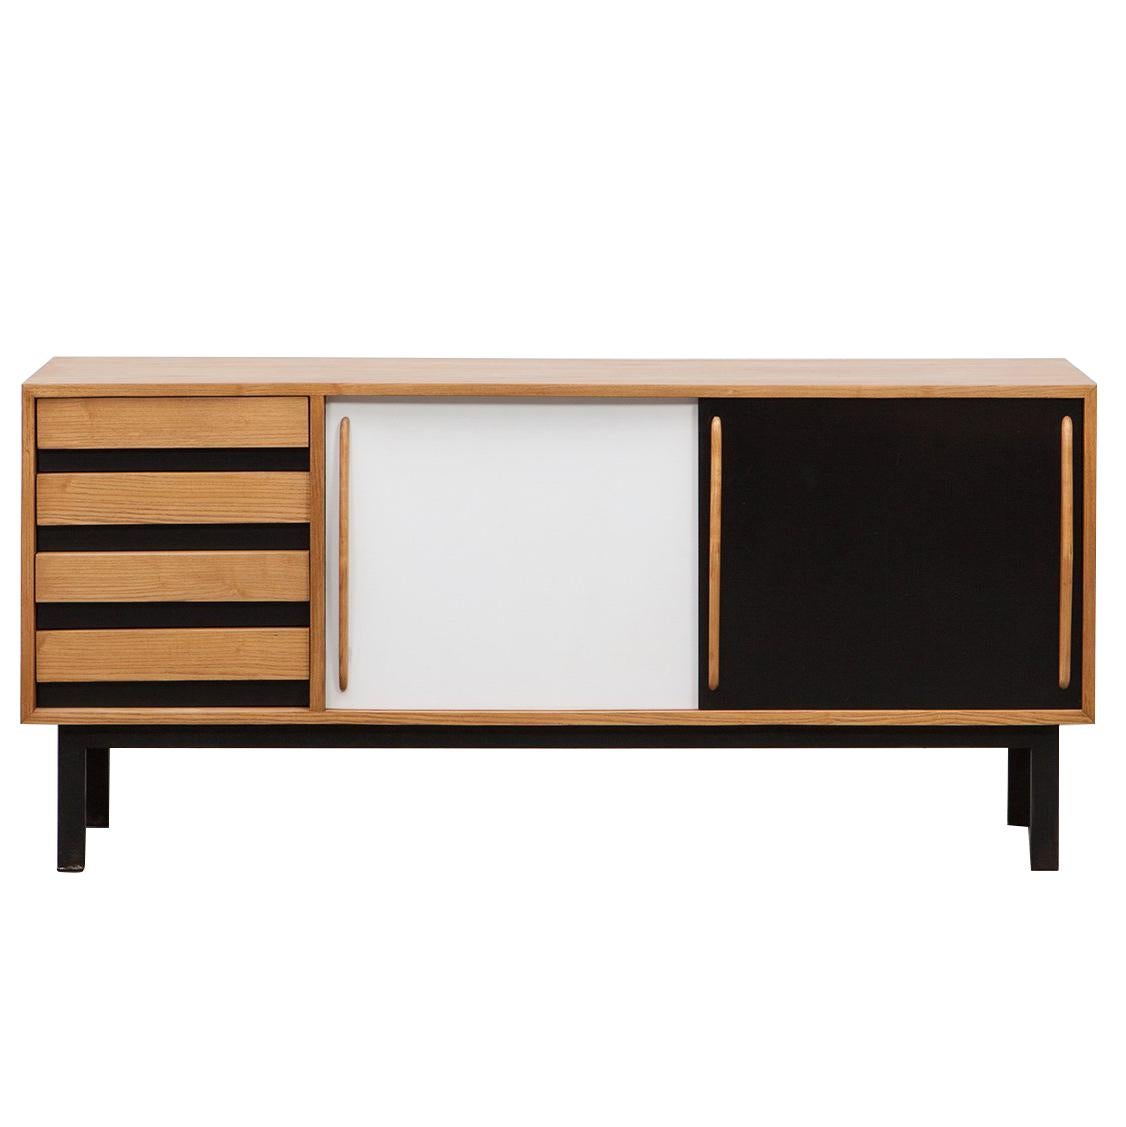 1950's ash and laminate Sideboard by Charlotte Perriand 'e'